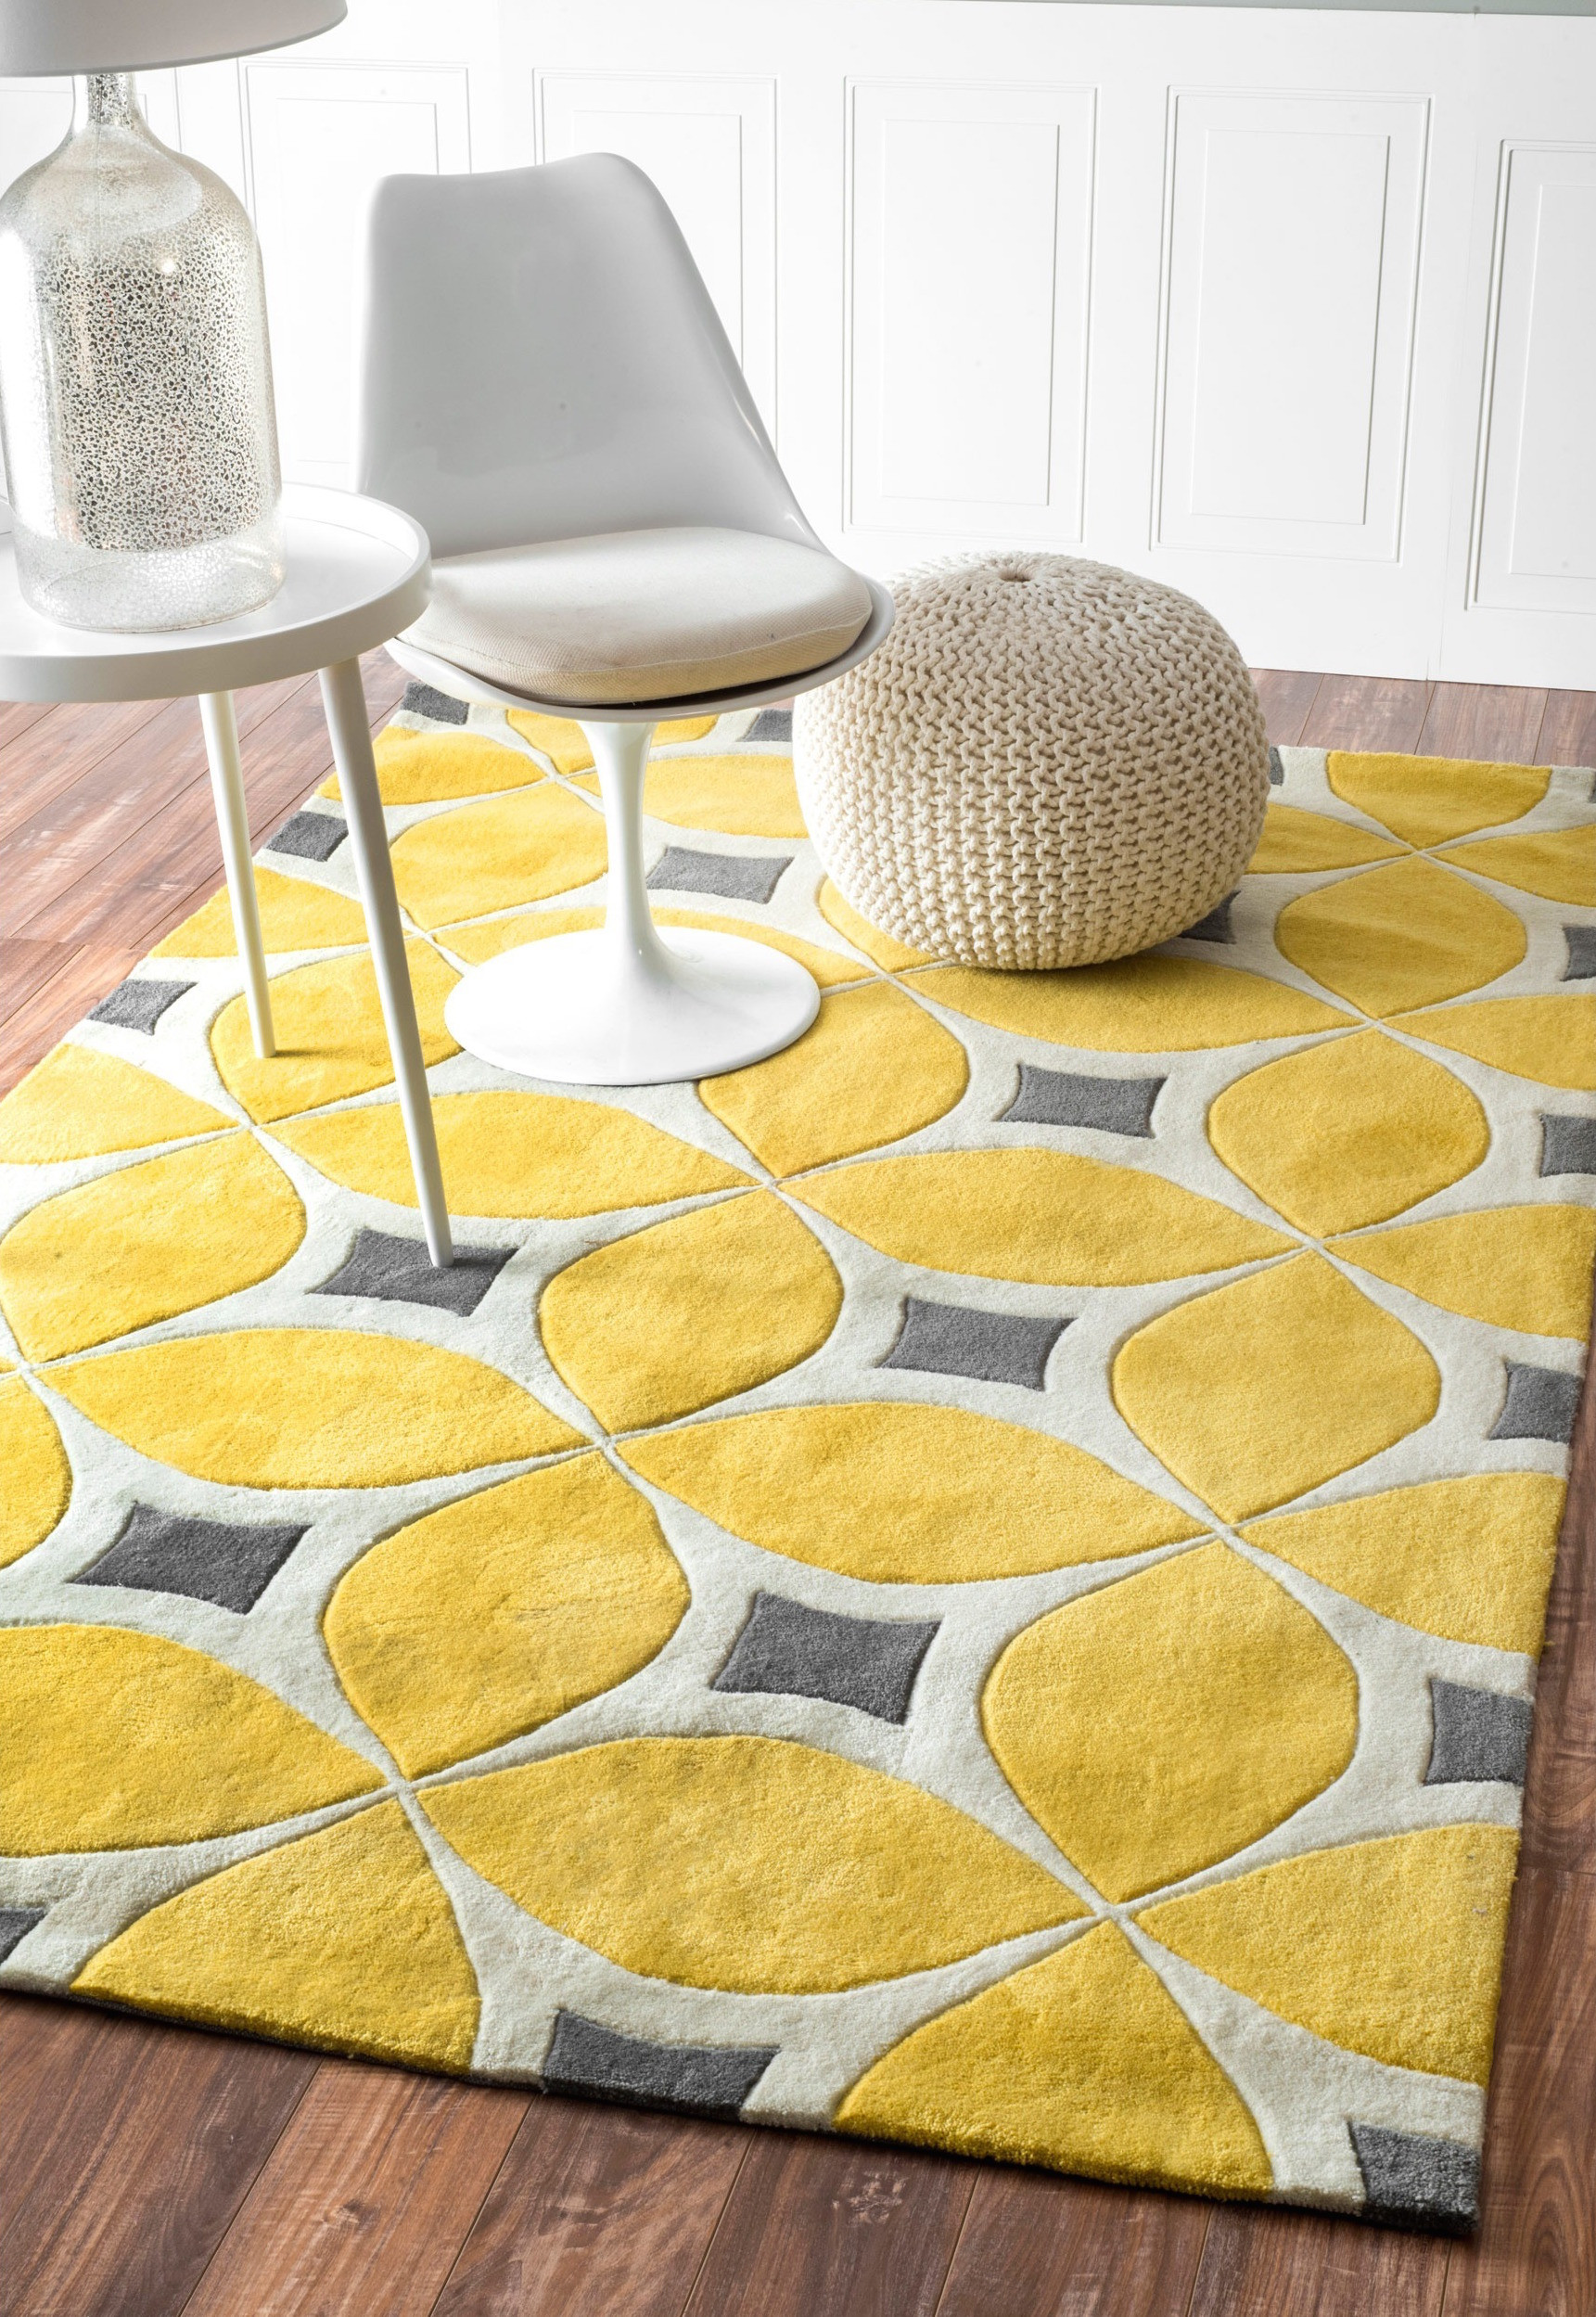 Yellow Rugs For Living Room
 25 Yellow Rug and Carpet Ideas to Brighten up Any Room